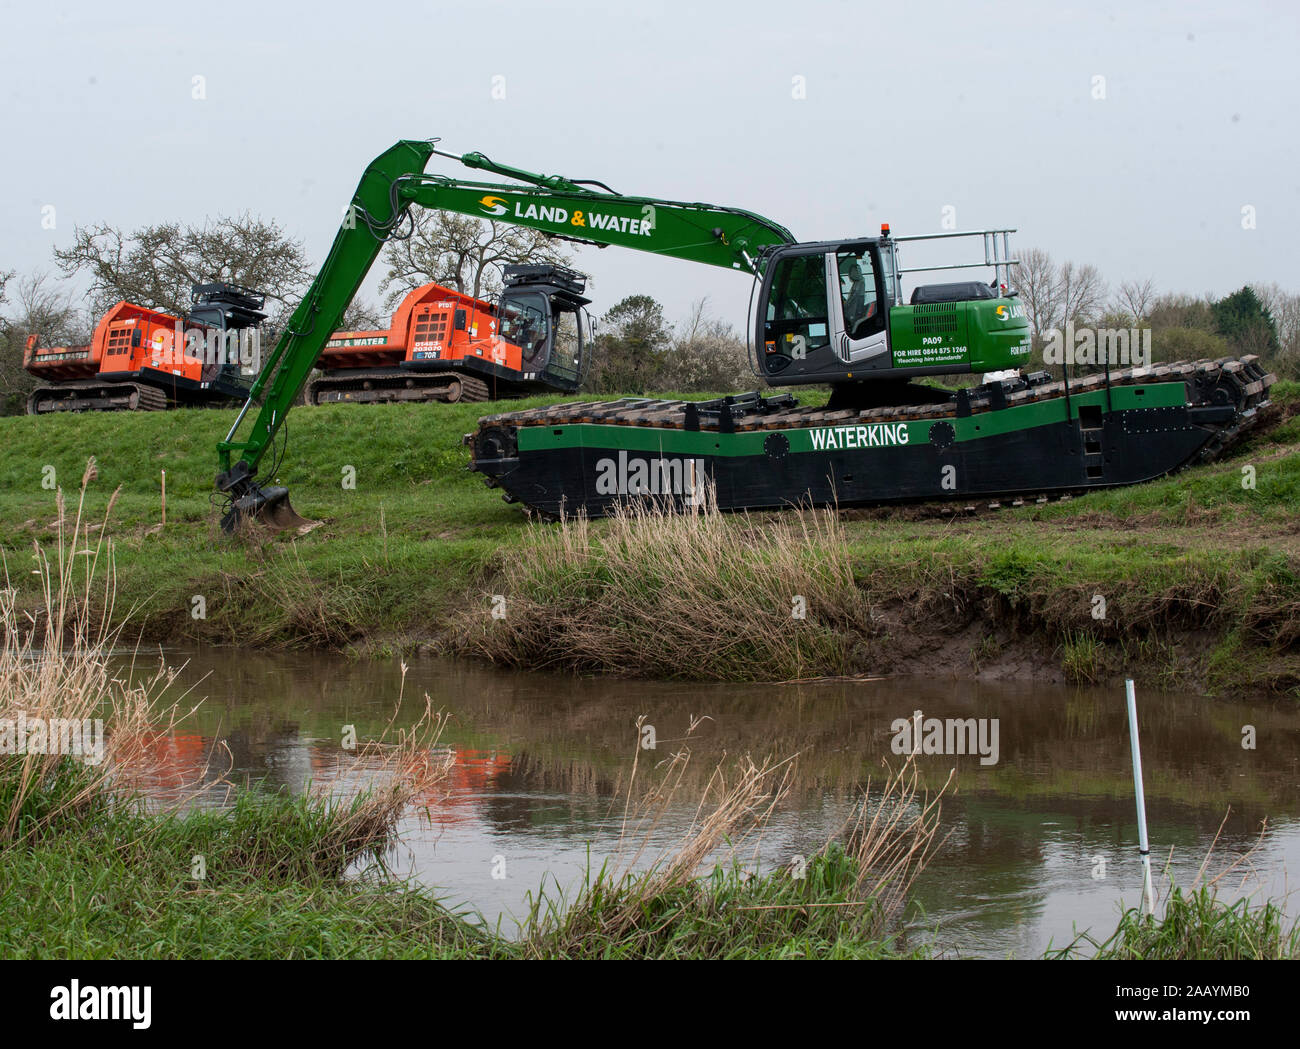 Dredging begins on the local river to prevent further flooding at Moreland in Somerset. Homes in the area were recently devastated by severe flooding. March 2014. Stock Photo